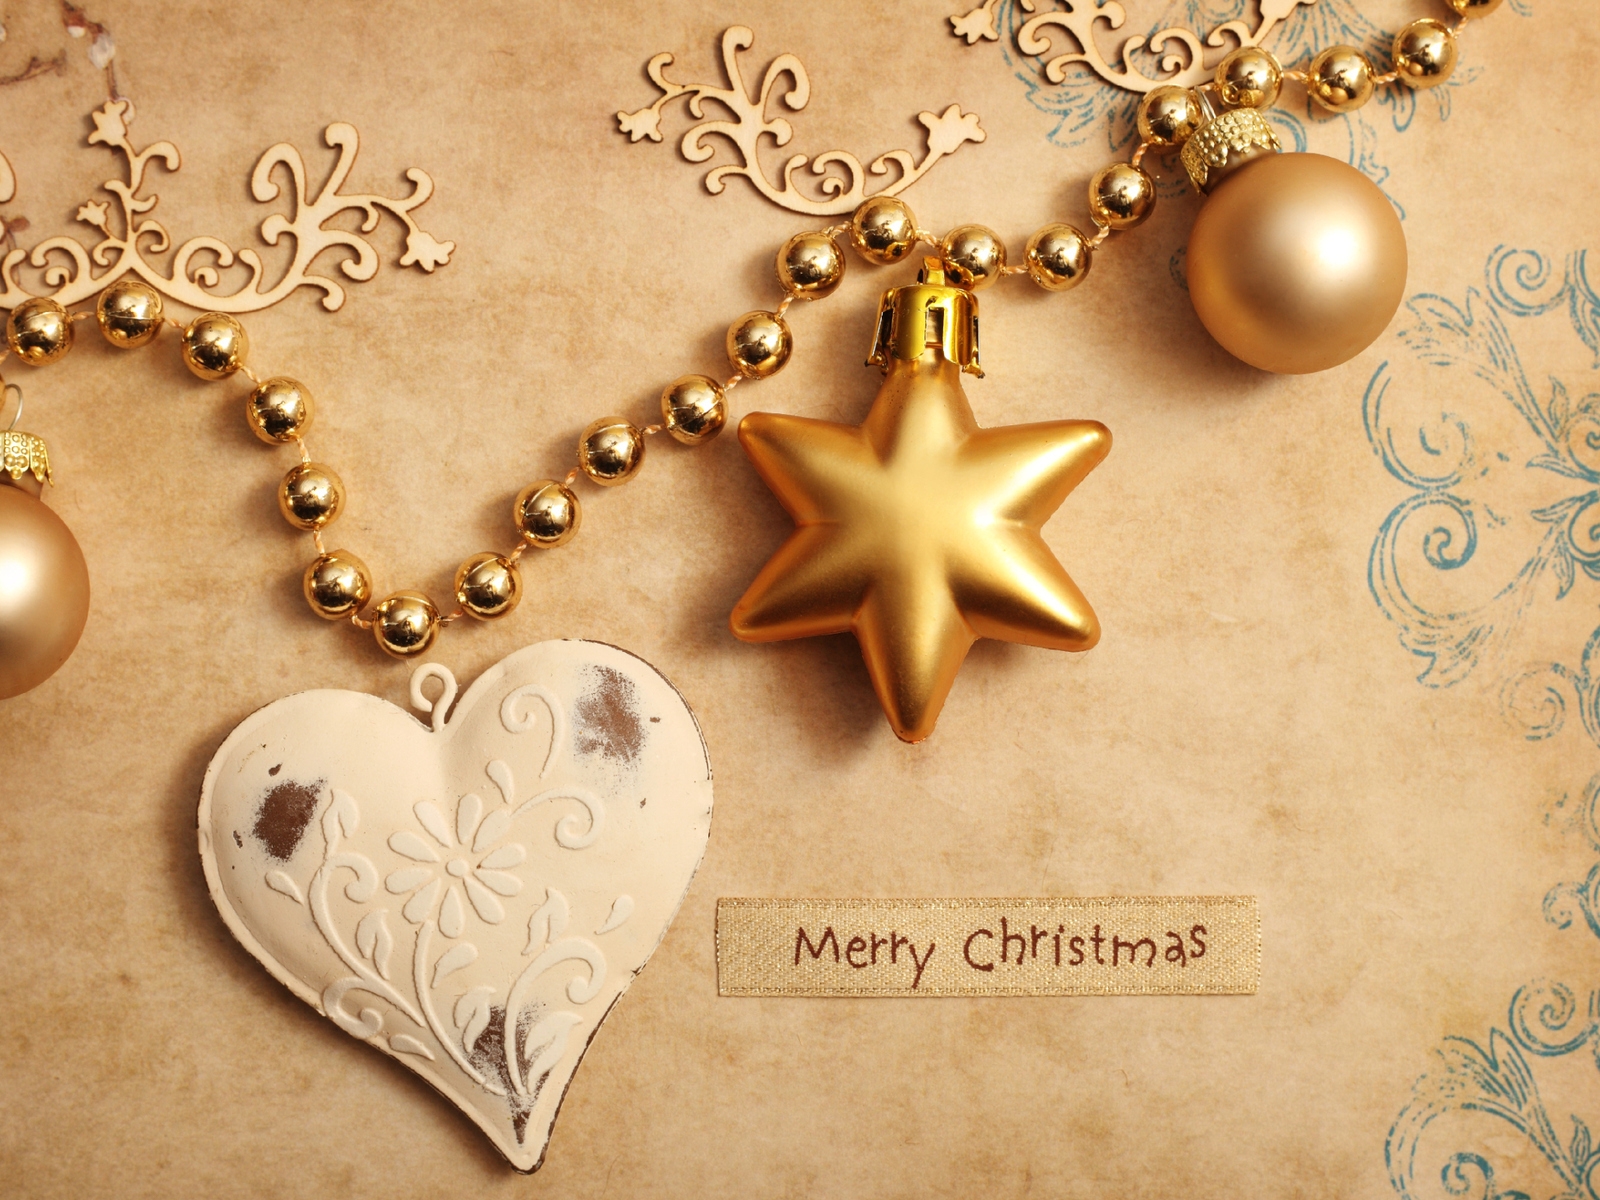 Merry Christmas Card for 1600 x 1200 resolution